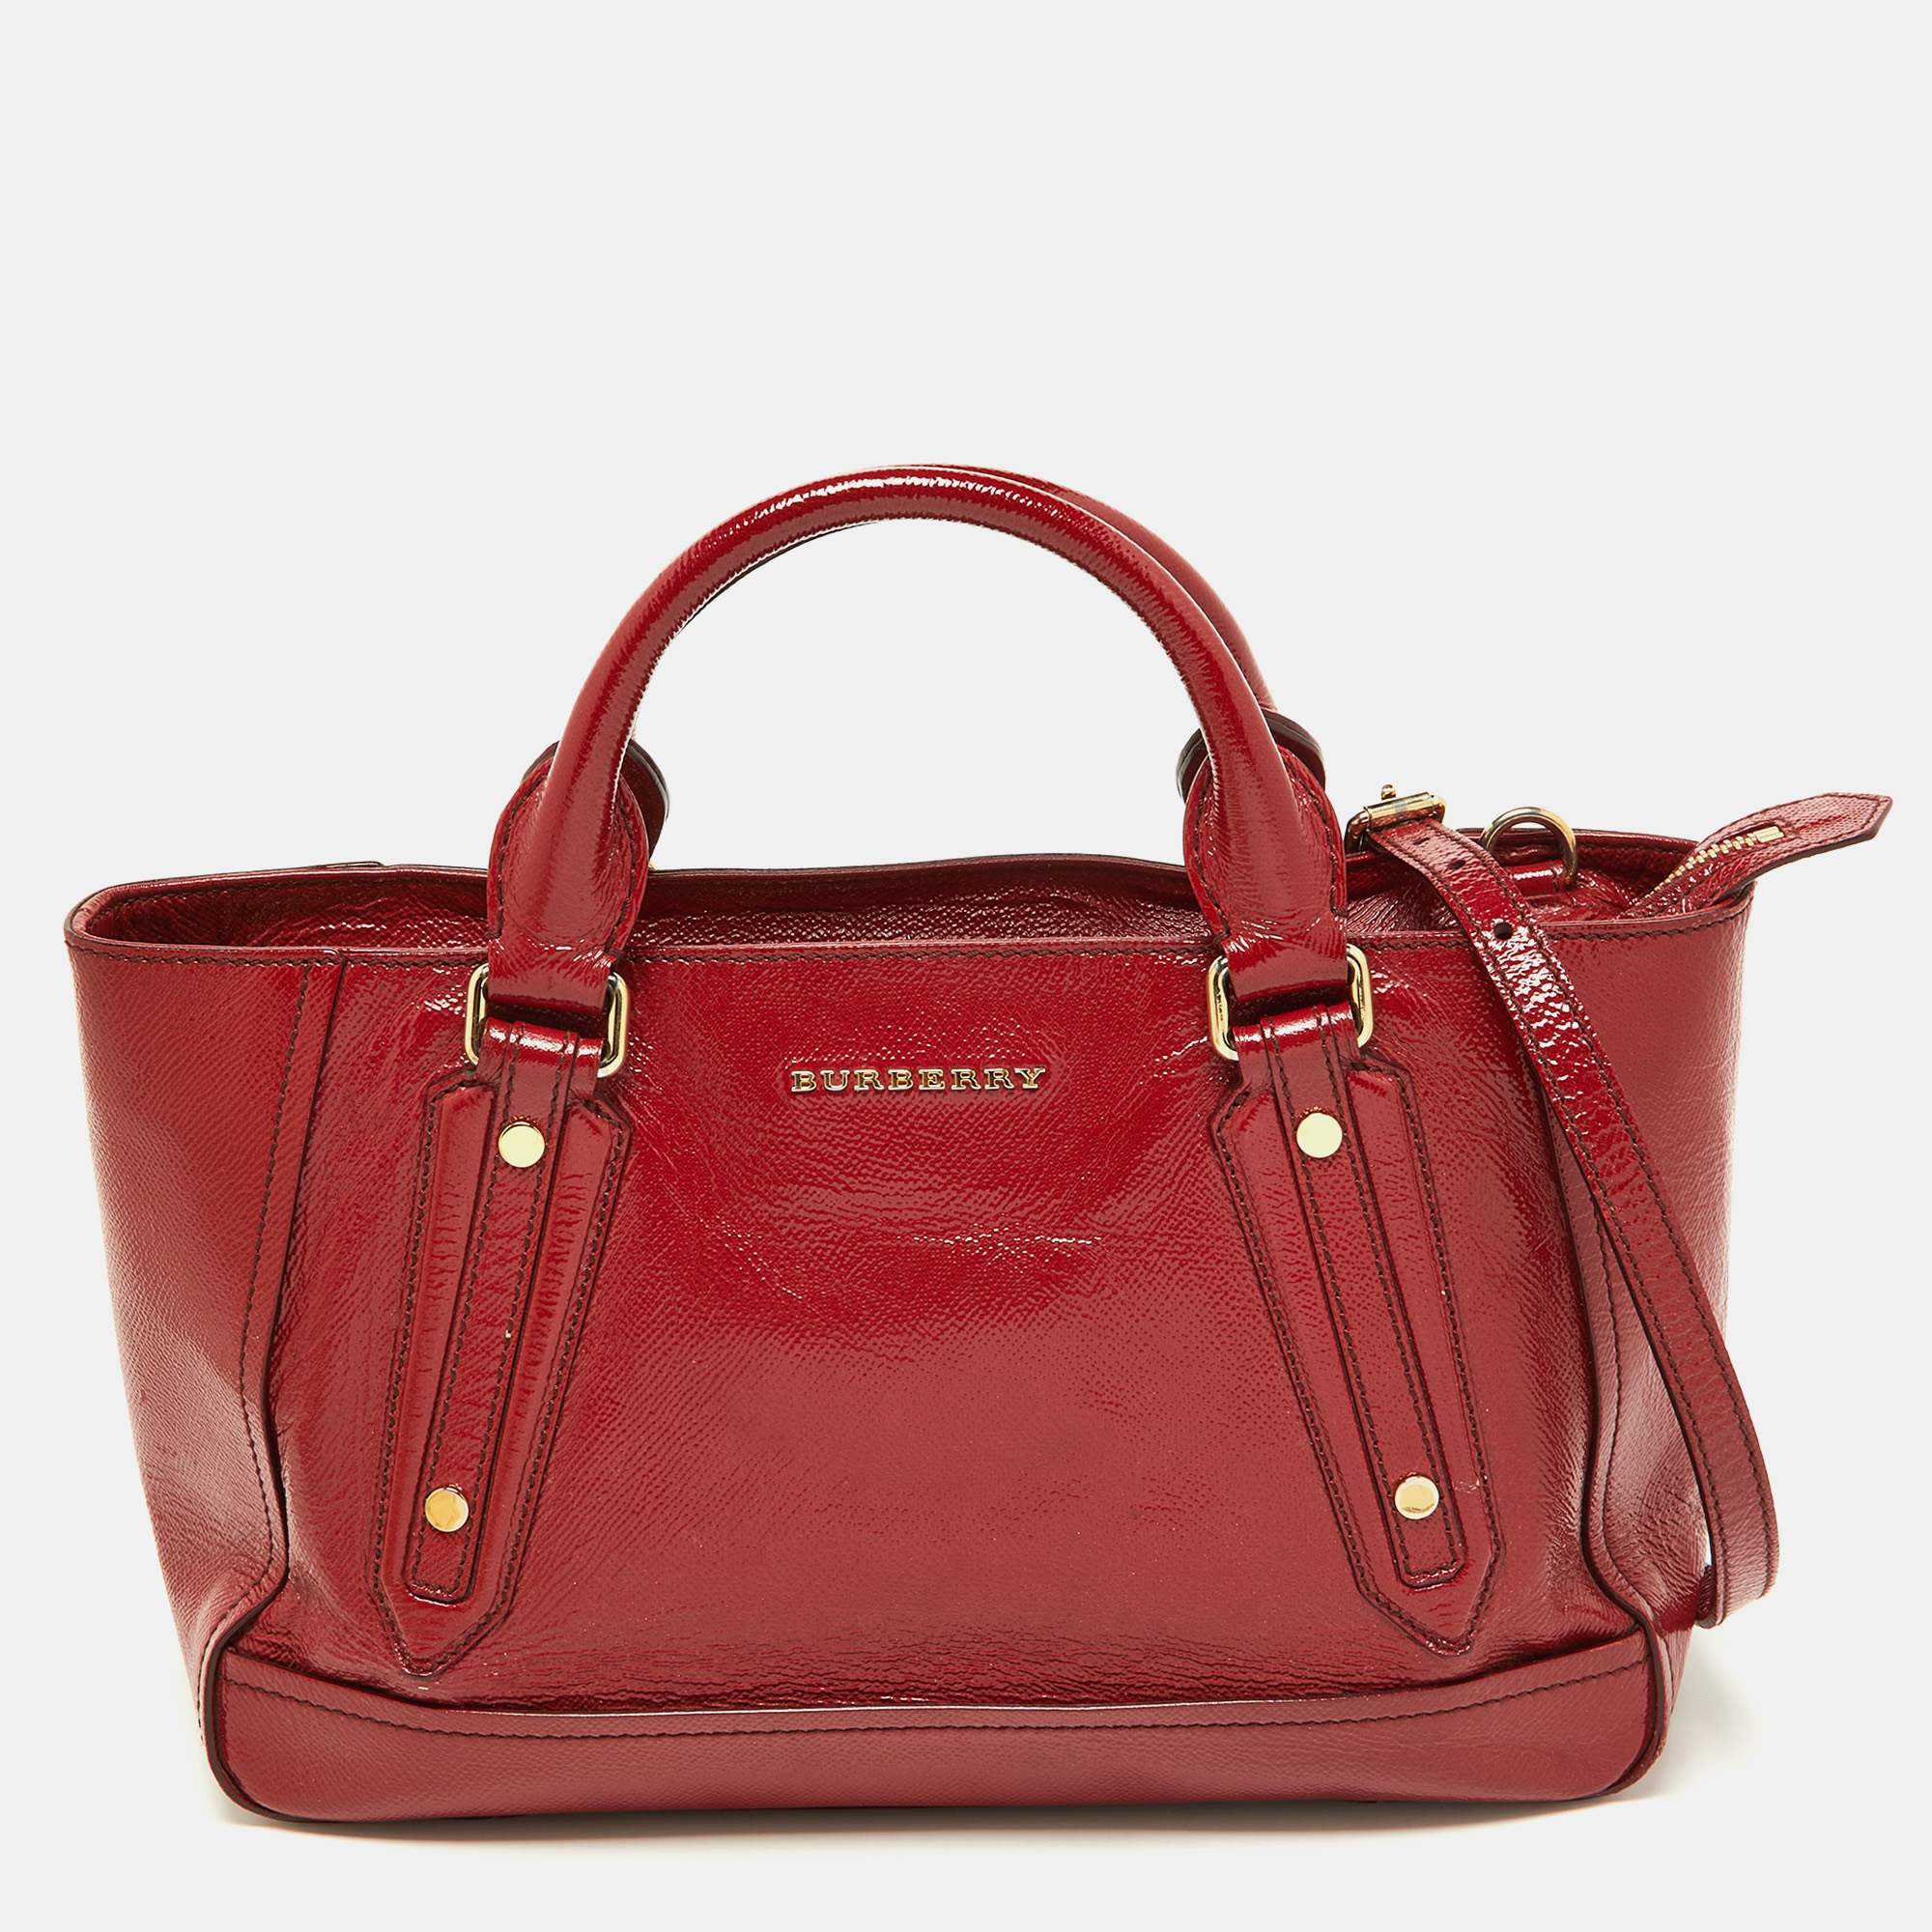 Burberry Red Patent Leather Somerford Convertible Tote